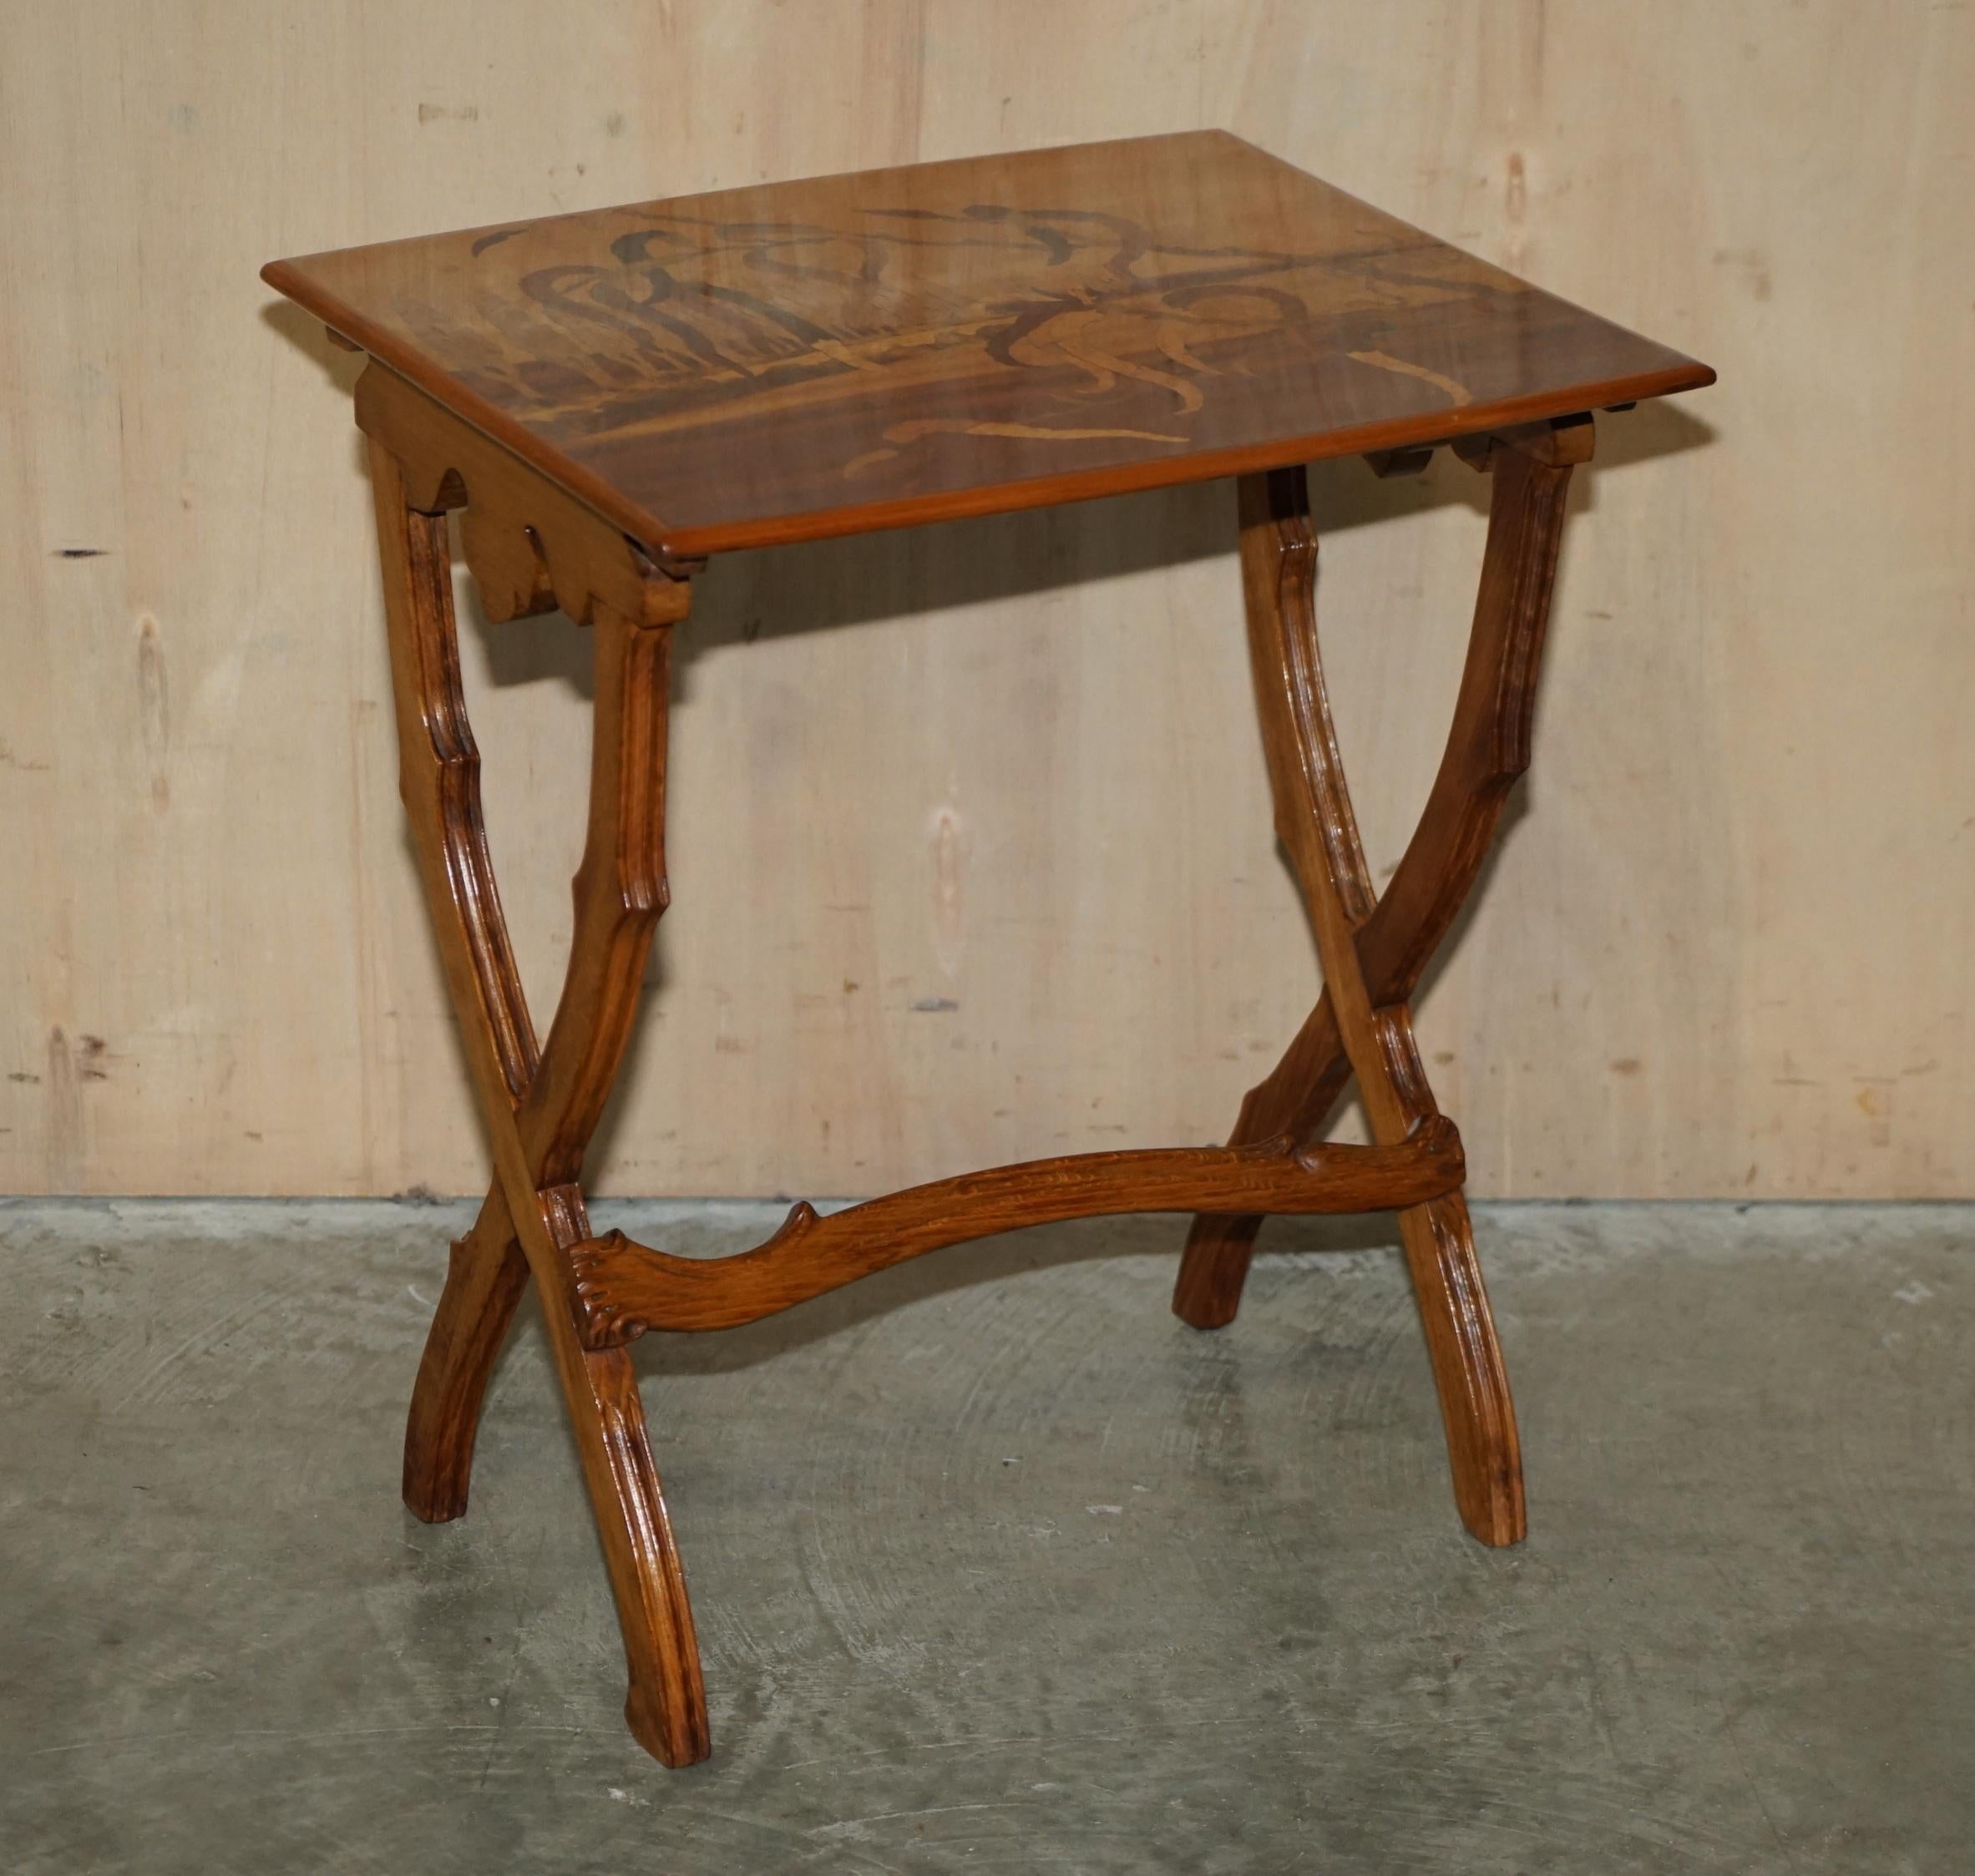 Royal House Antiques

Royal House Antiques is delighted to offer for sale this exceptionally rare Emile Galle signed side table

Please note the delivery fee listed is just a guide, it covers within the M25 only for the UK and local Europe only